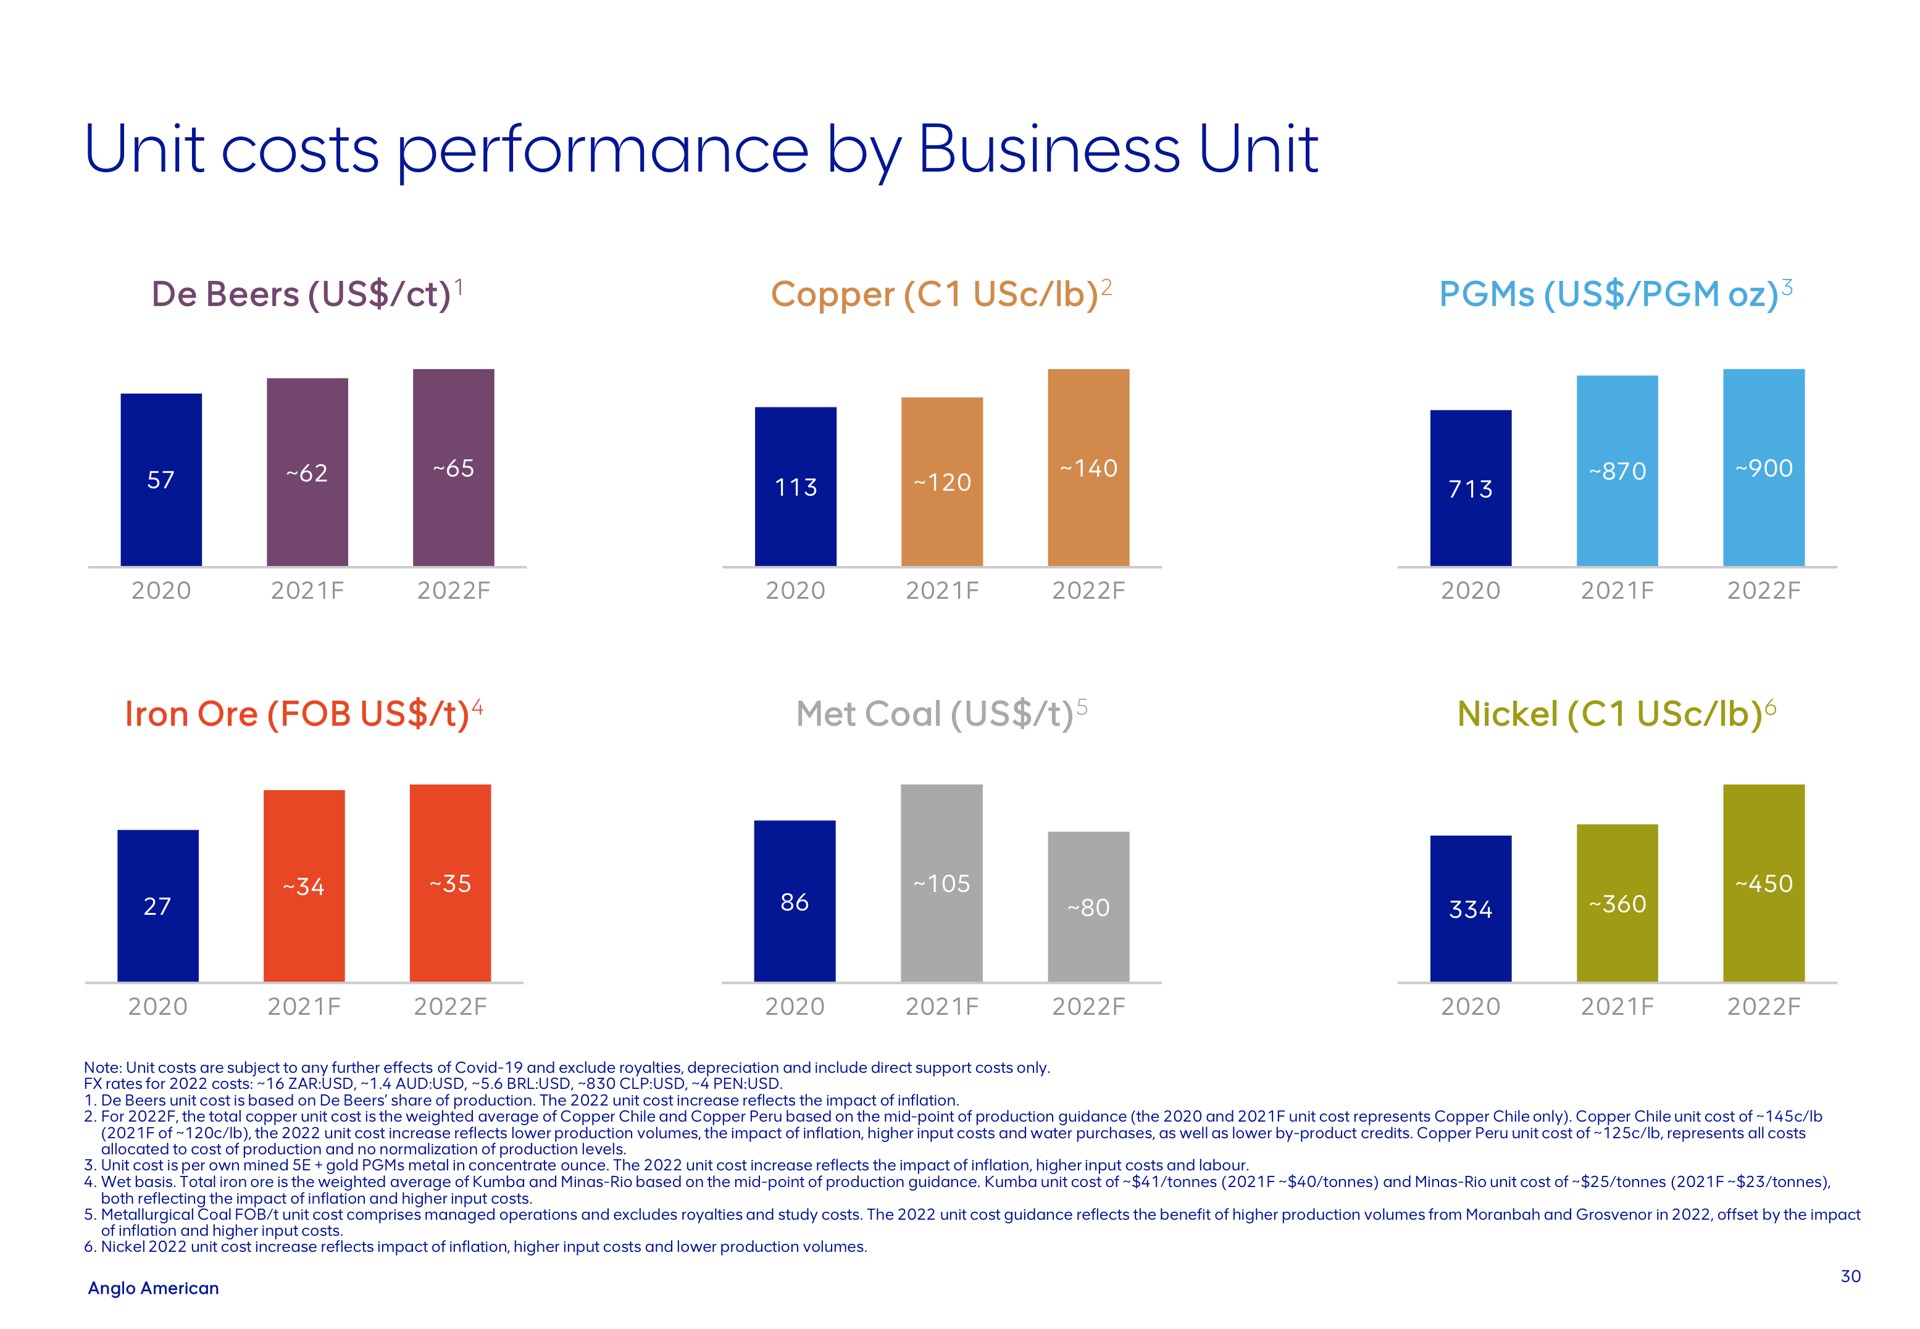 unit costs performance by business unit | AngloAmerican